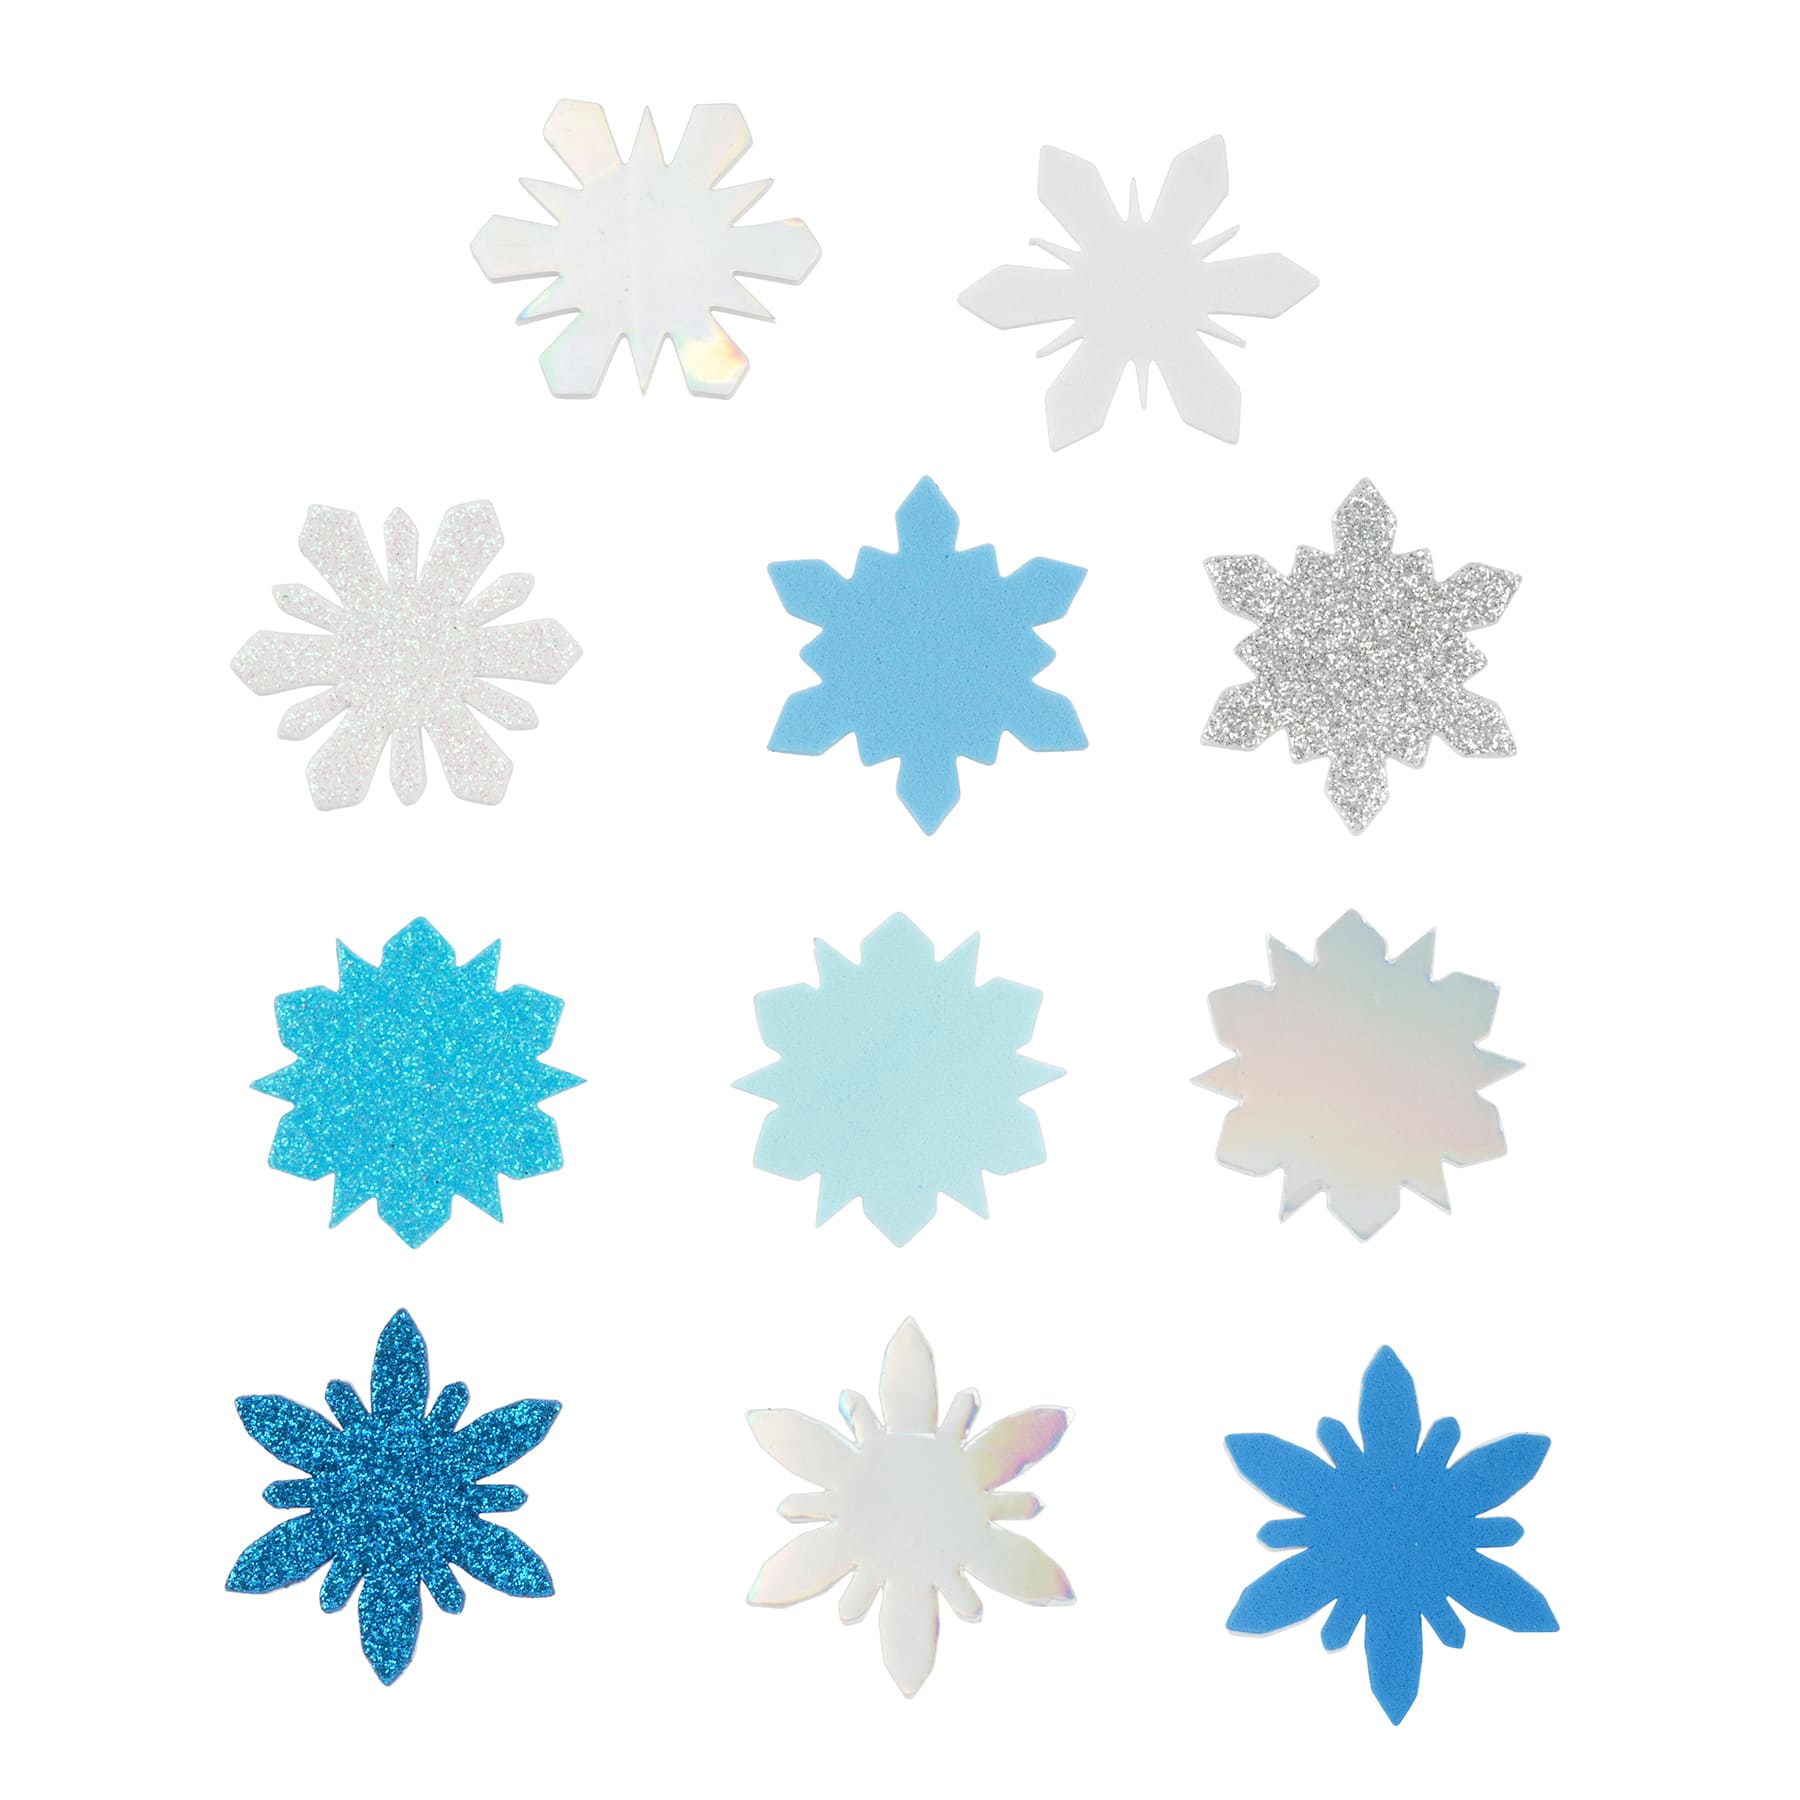 Incentive Stickers - Snowflake